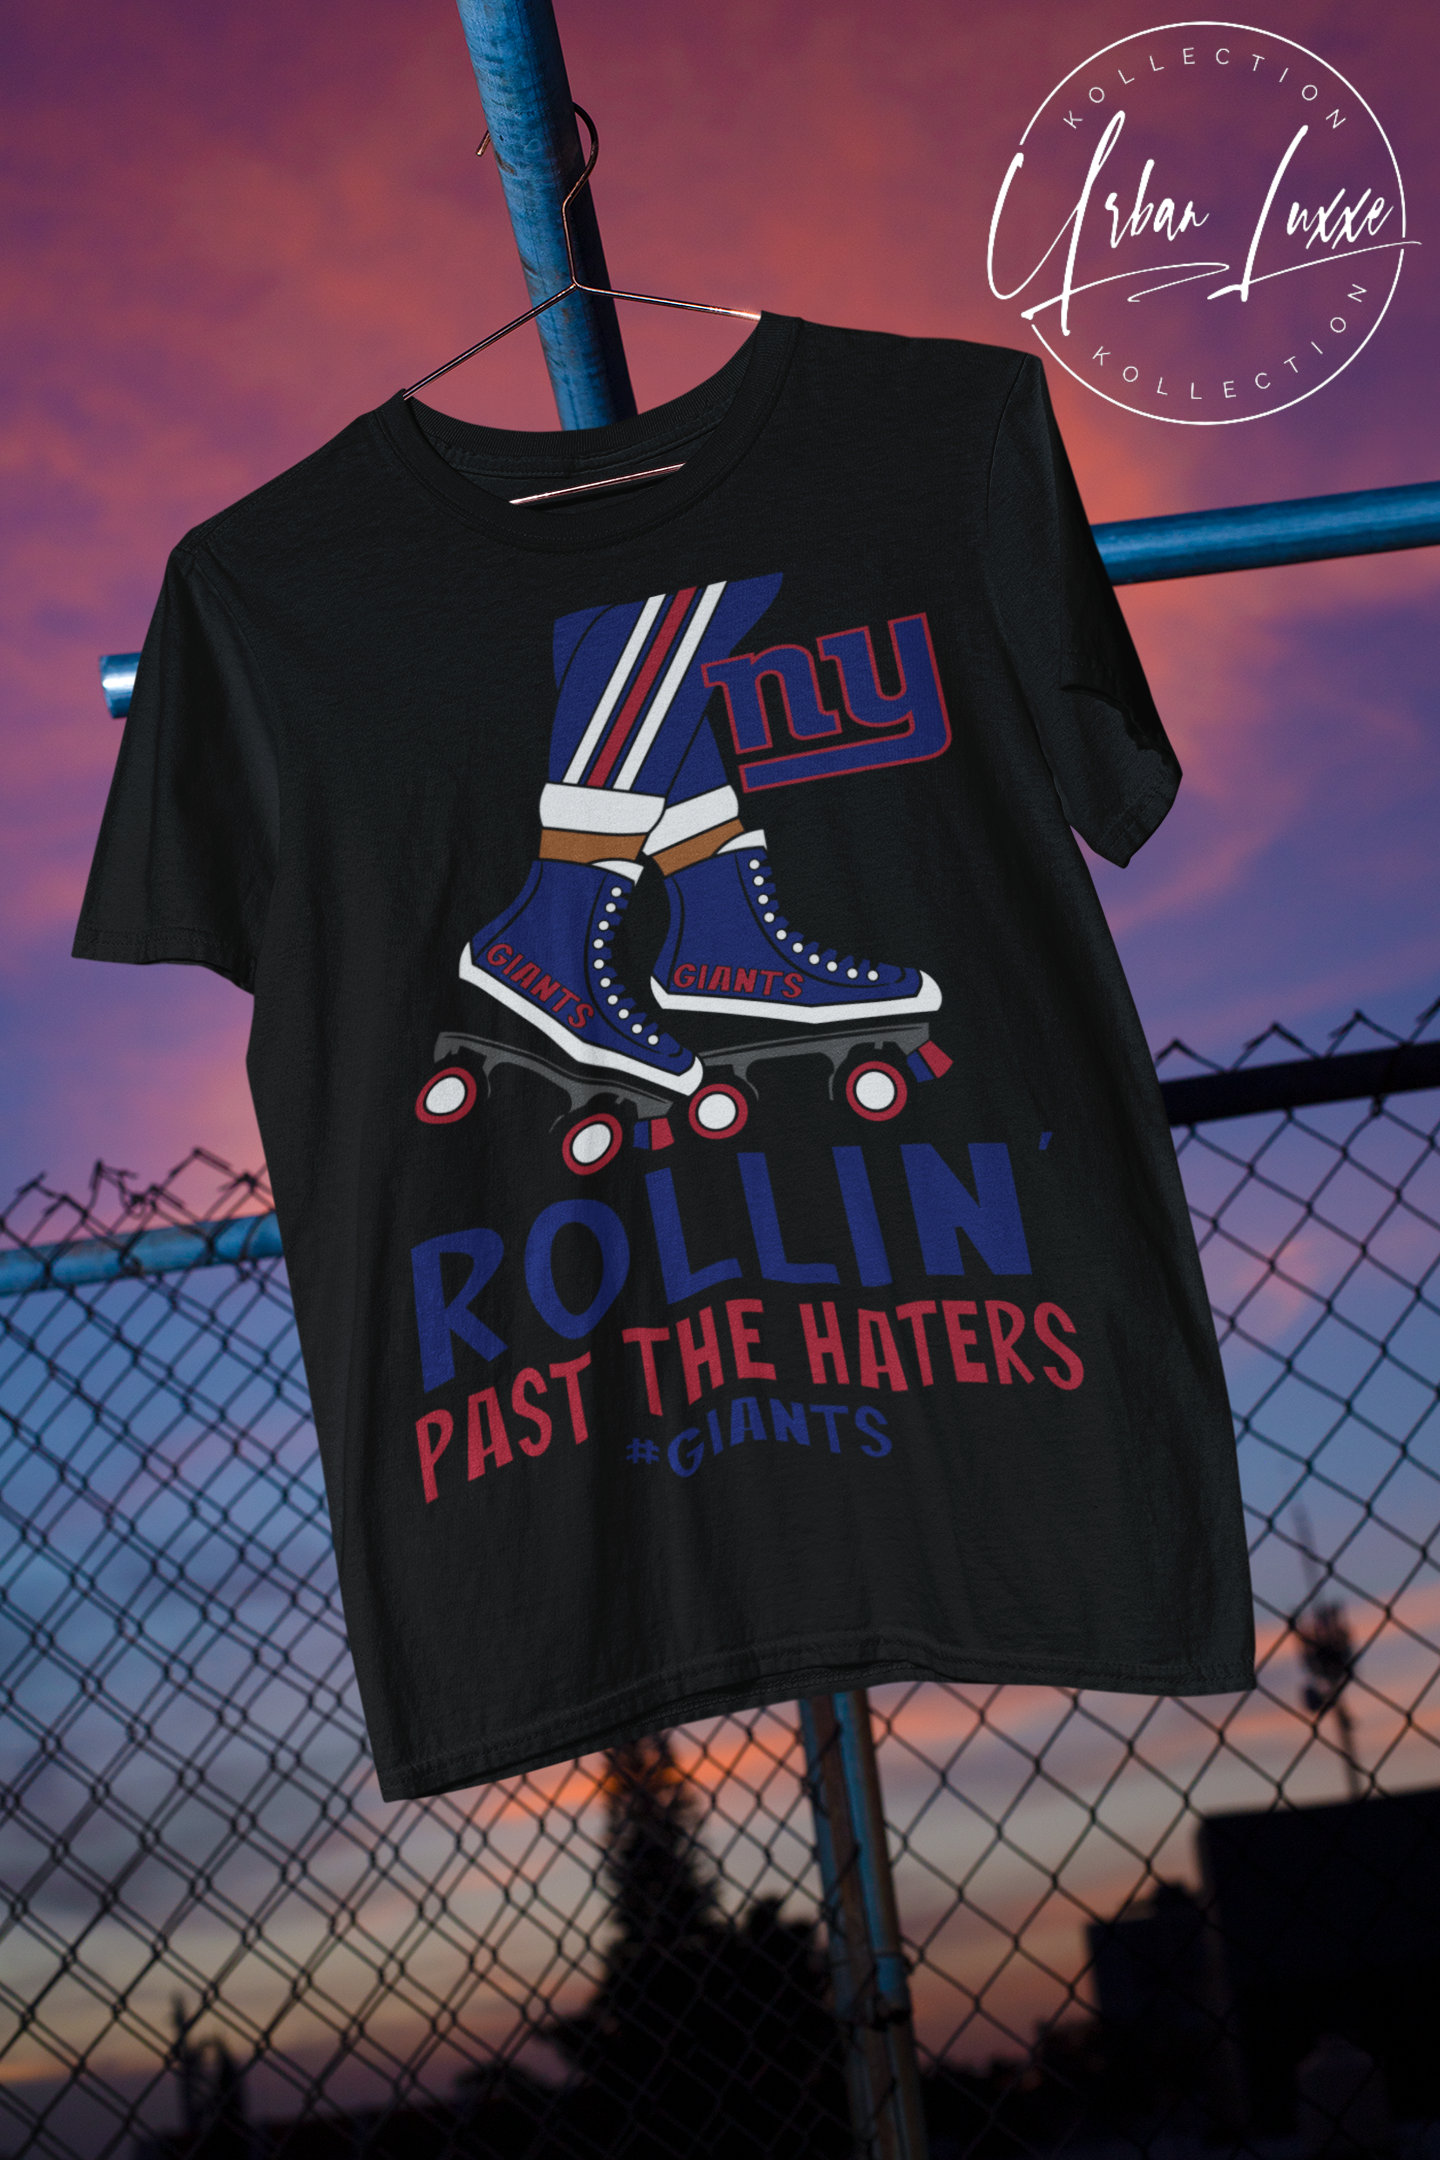 Rollin’ Past The Haters New York Giants T-shirt